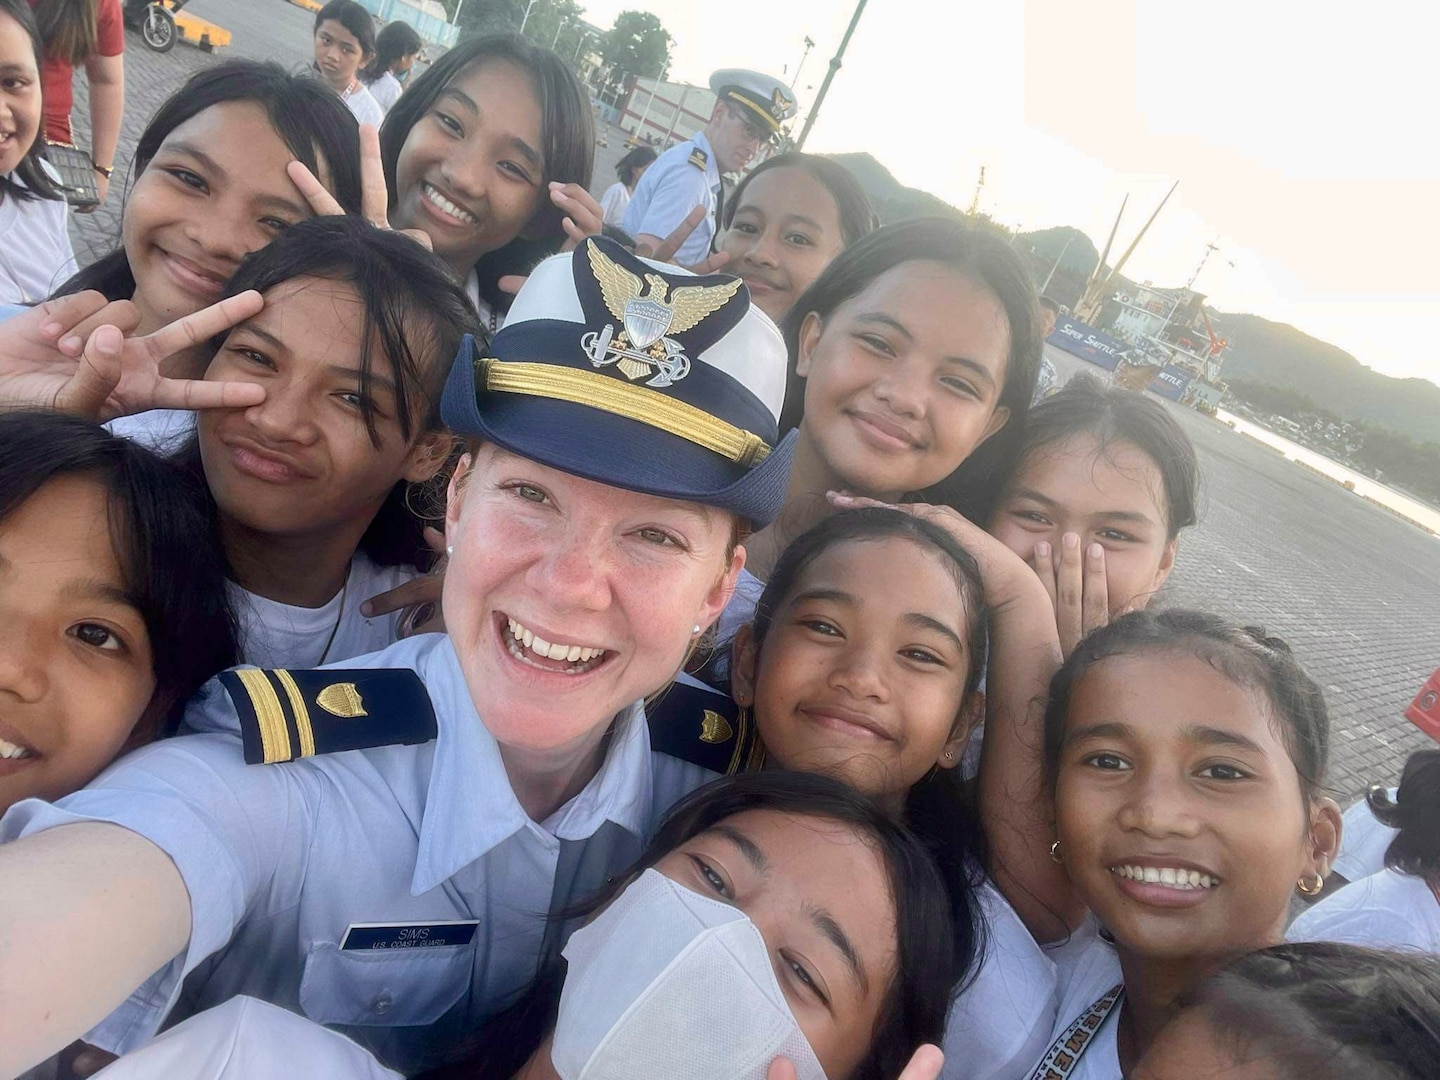 Lt. j.g. Mary Sims, executive officer of USCGC Frederick Hatch (WPC 1143), takes a photo with children at Bliss Elementary School in Tacloban, Philippines, on Oct. 21, 2023. In a historic first, the USCGC Frederick Hatch (WPC 1143) visited Tacloban, Philippines, from Oct. 19 to 23, 2023, and the crew conducted engagements marking a significant milestone in the enduring relationship between the United States and the Philippines. (U.S. Coast Guard photo by Lt. j.g. Mary Sims)